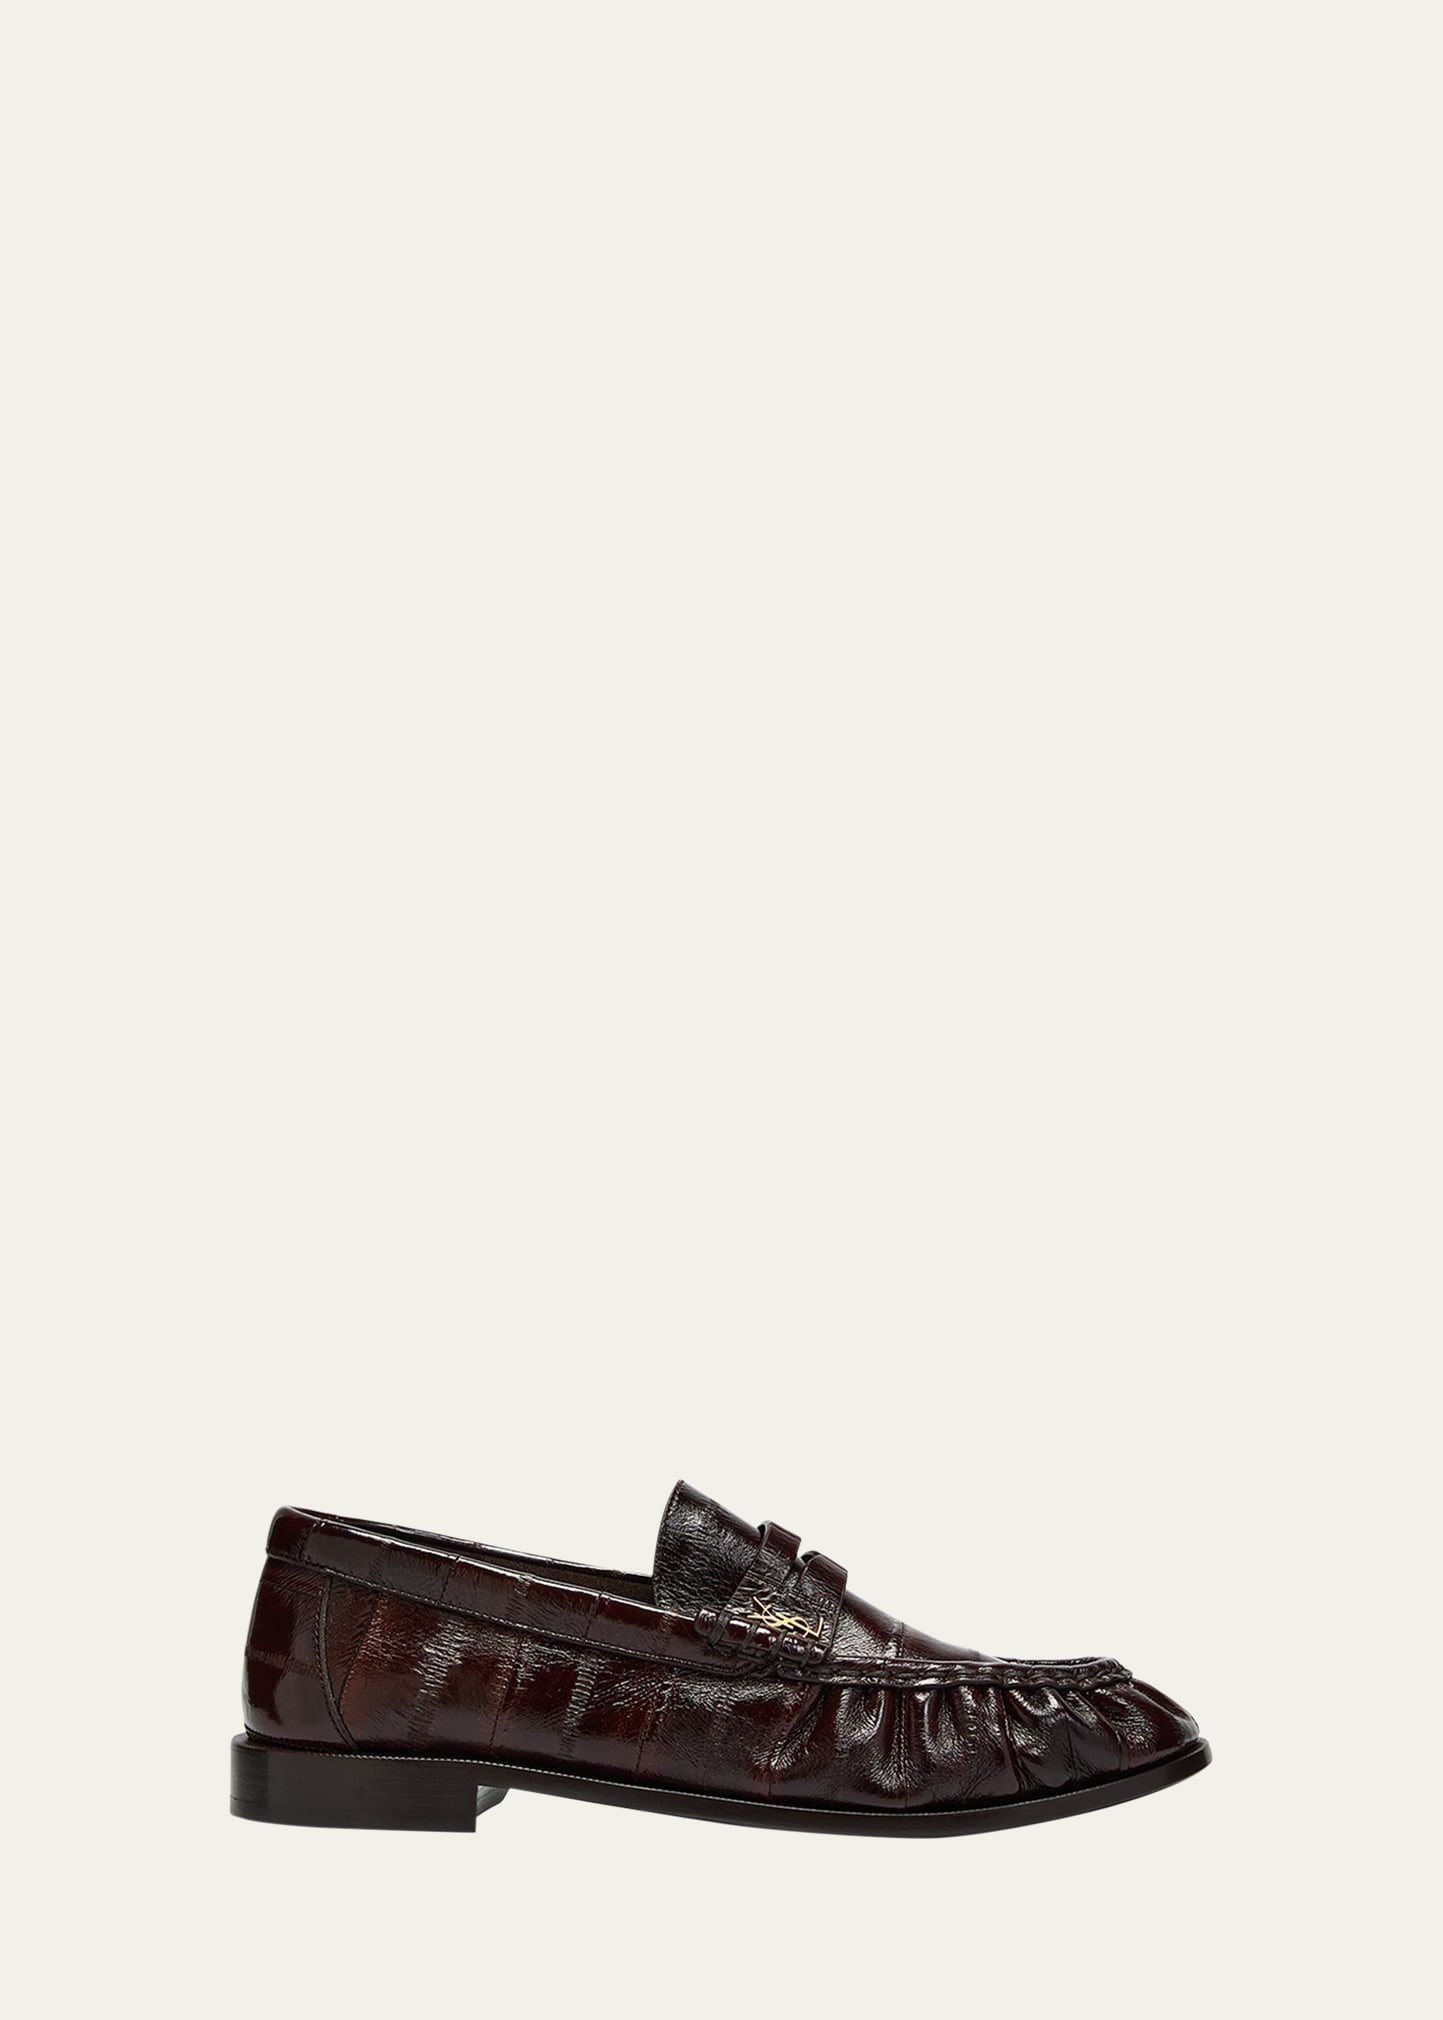 Saint Laurent Le Leather Ysl Penny Loafers In Scotch Brown